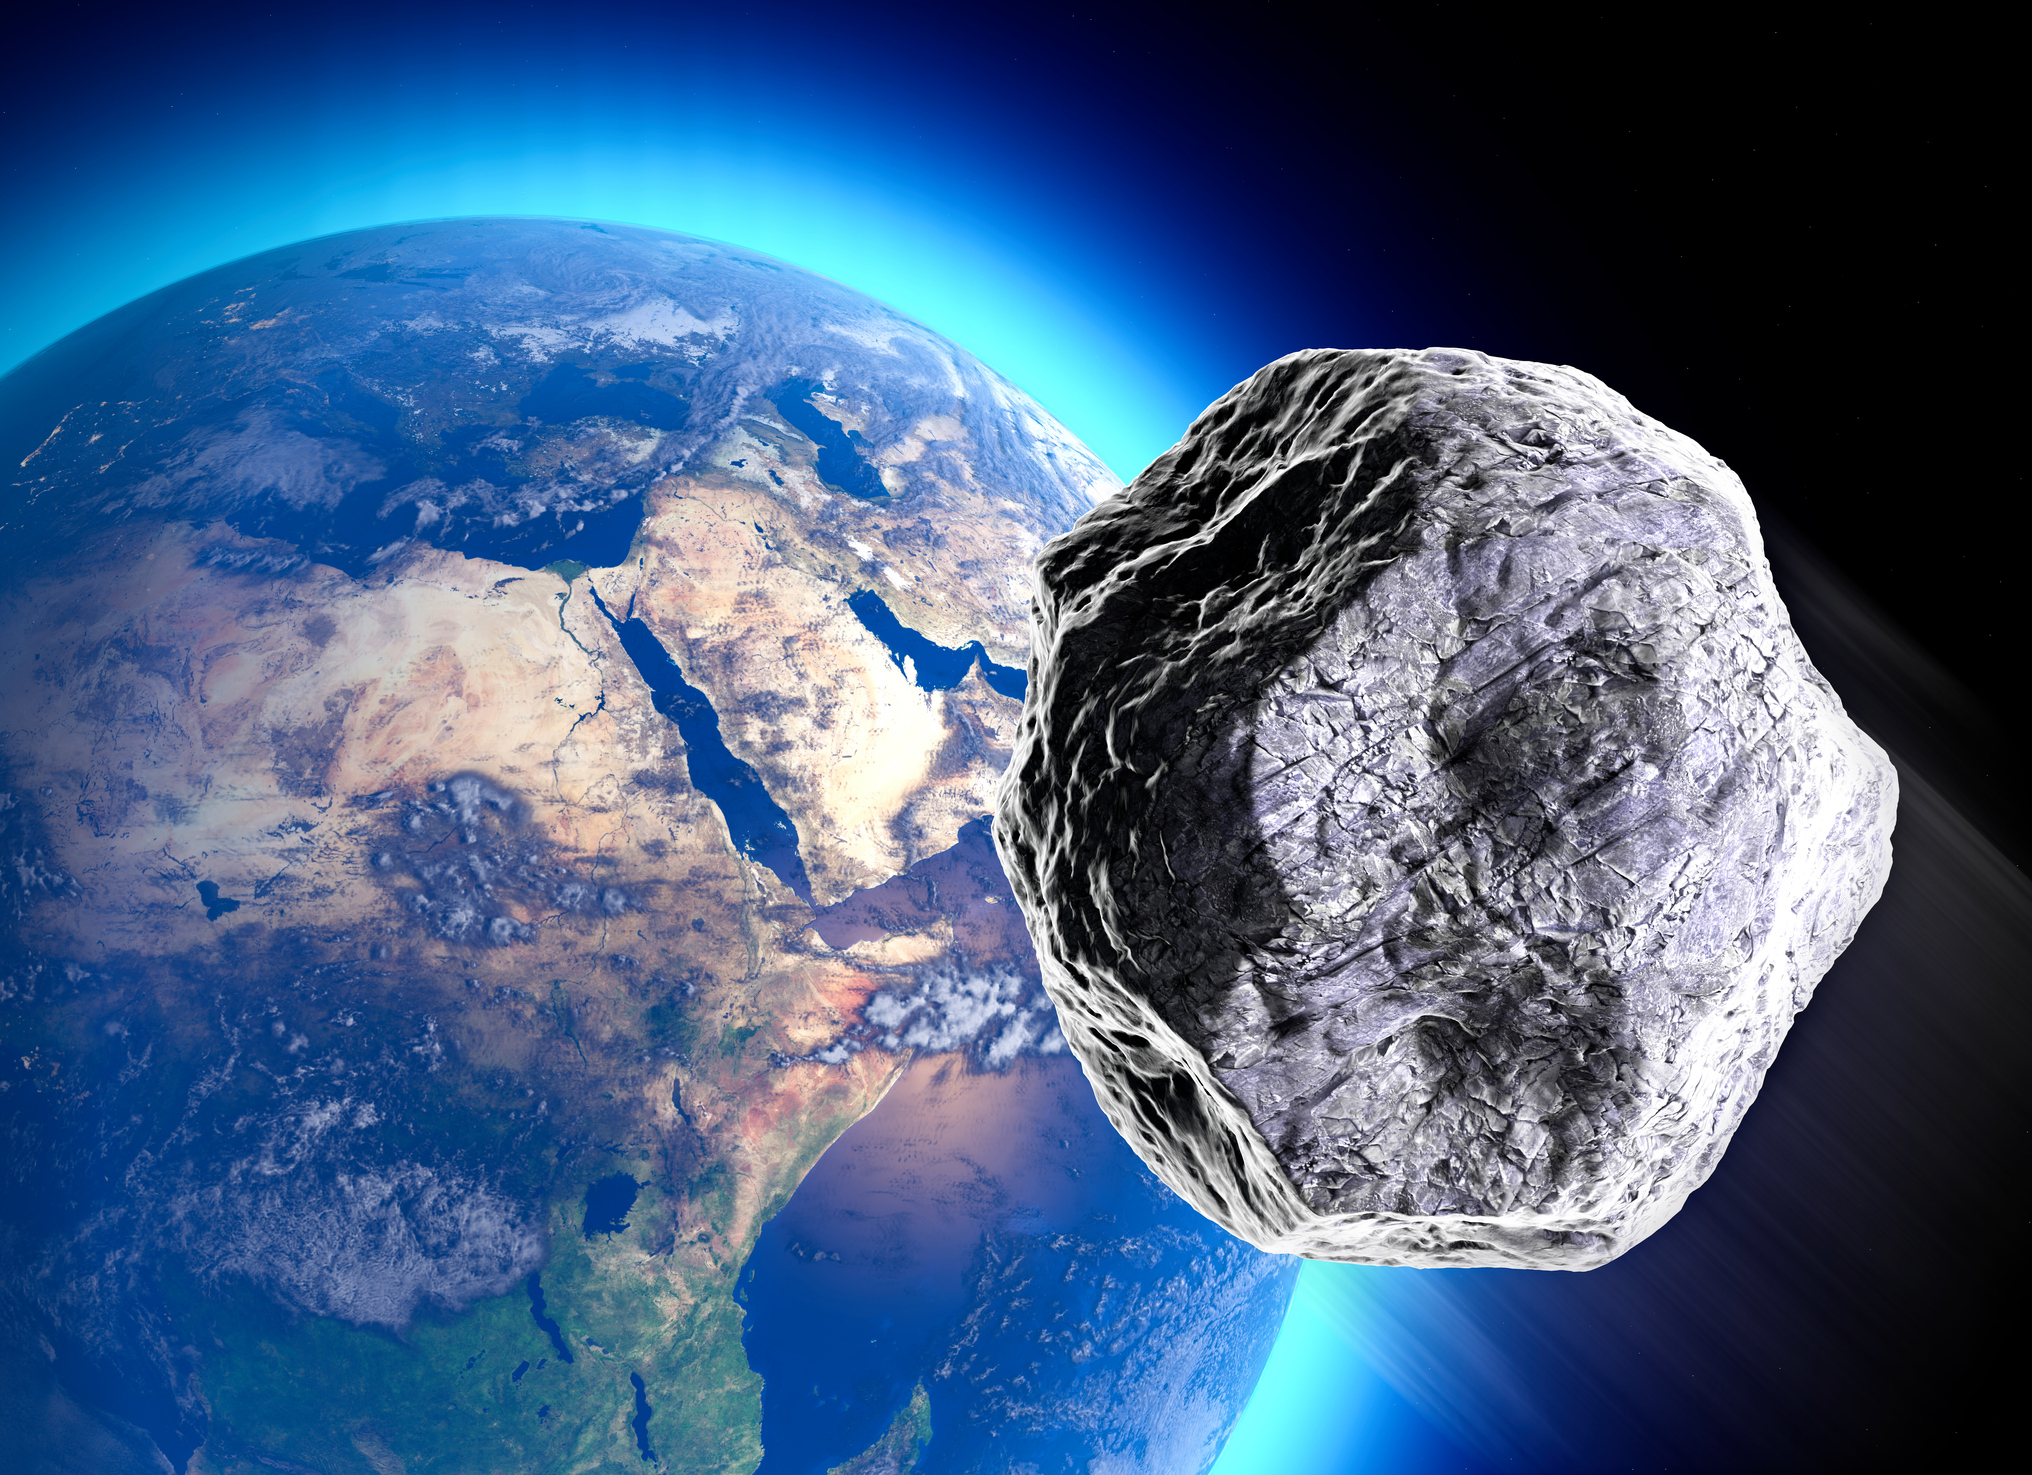 Huge Asteroid Will Be One of the Closest Approaches to Earth Next Year